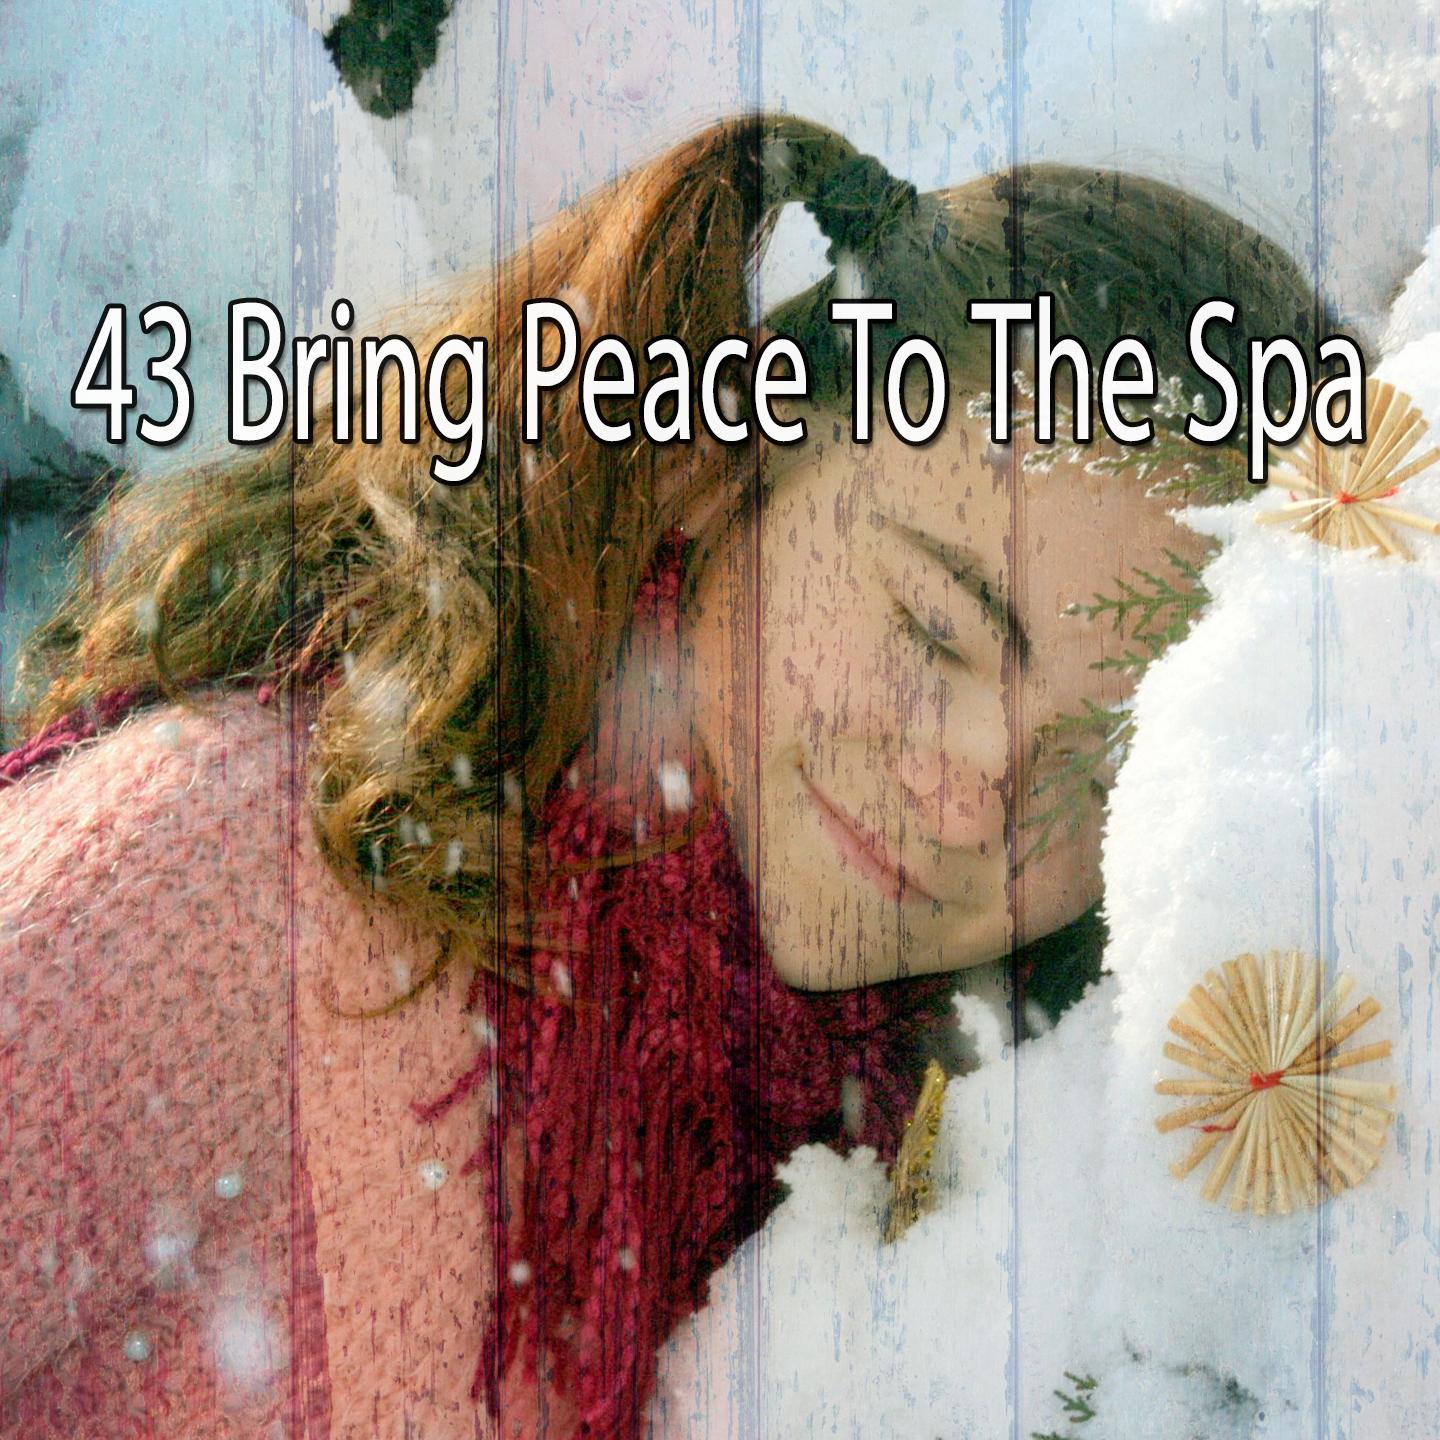 43 Bring Peace To the Spa